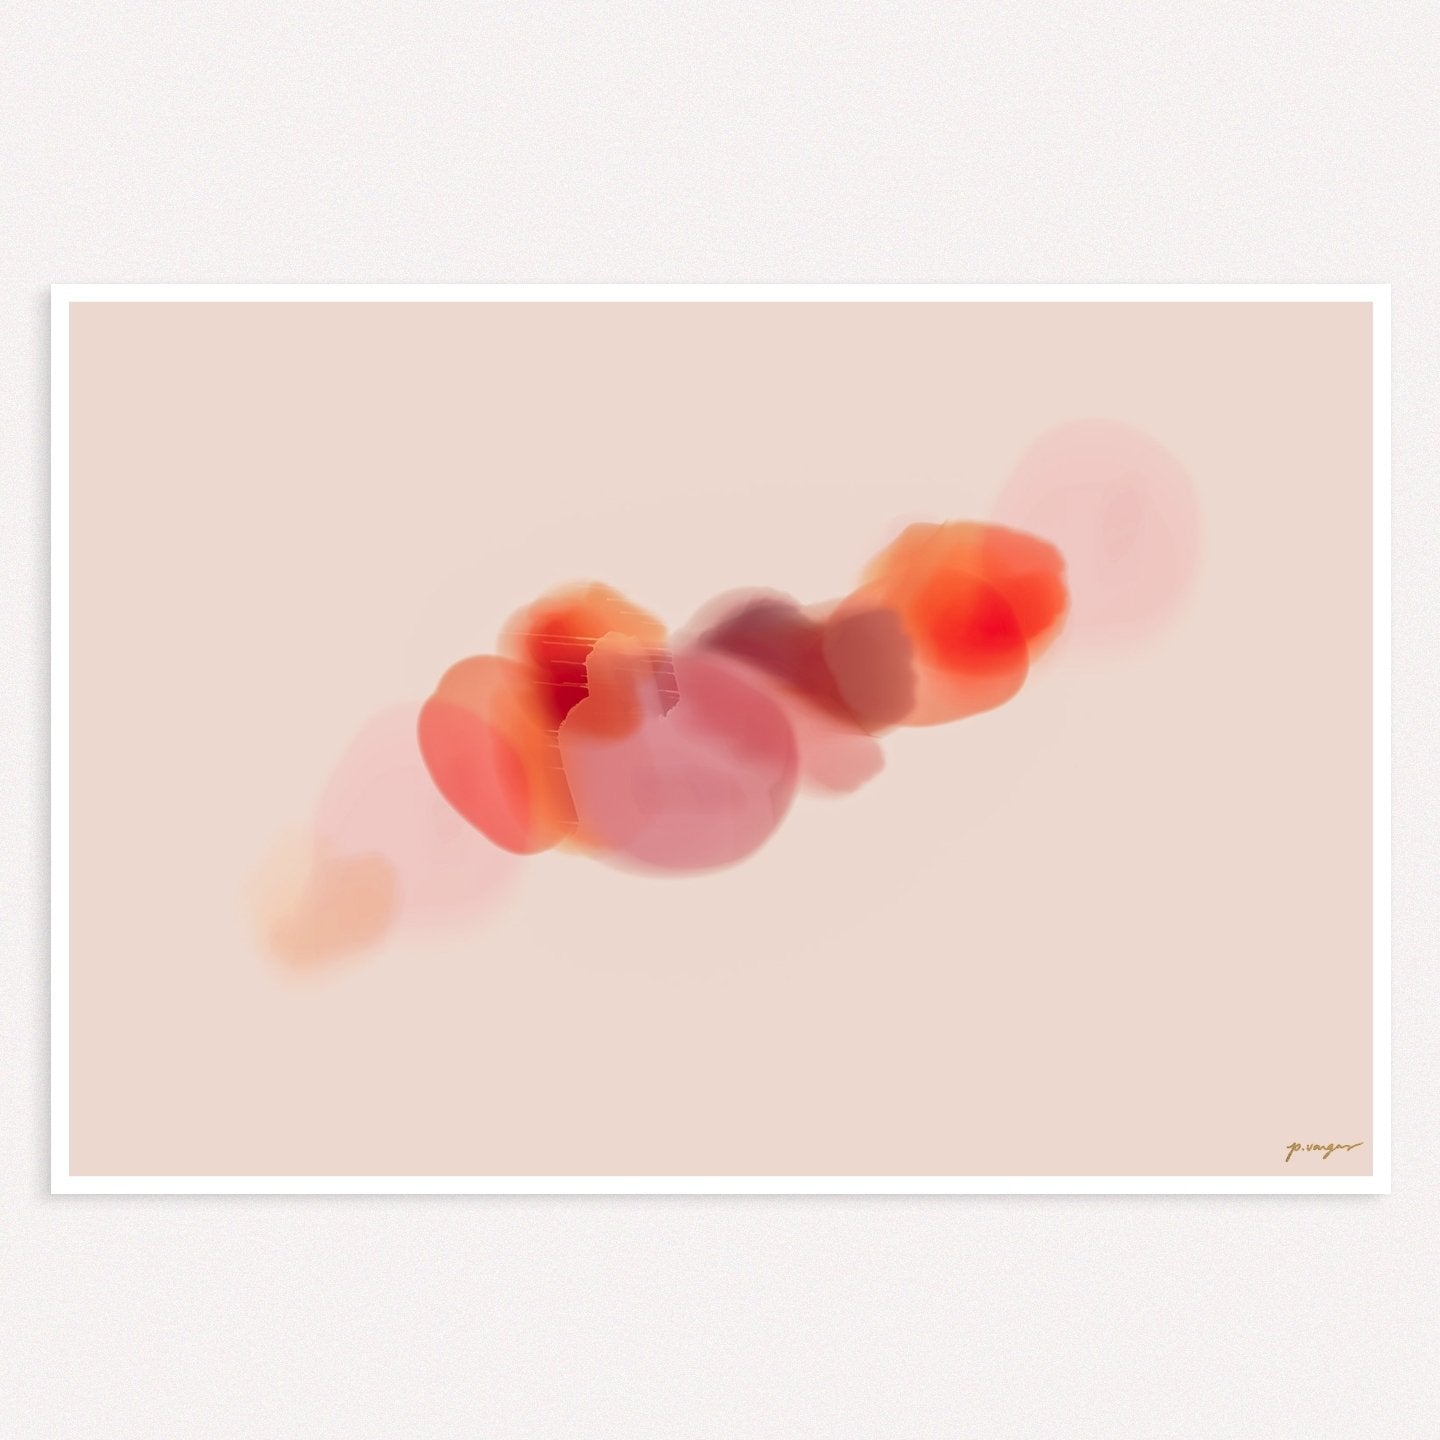 Prismatic No.1, Horizontal, pink and orange colorful abstract wall art print by Parima Studio